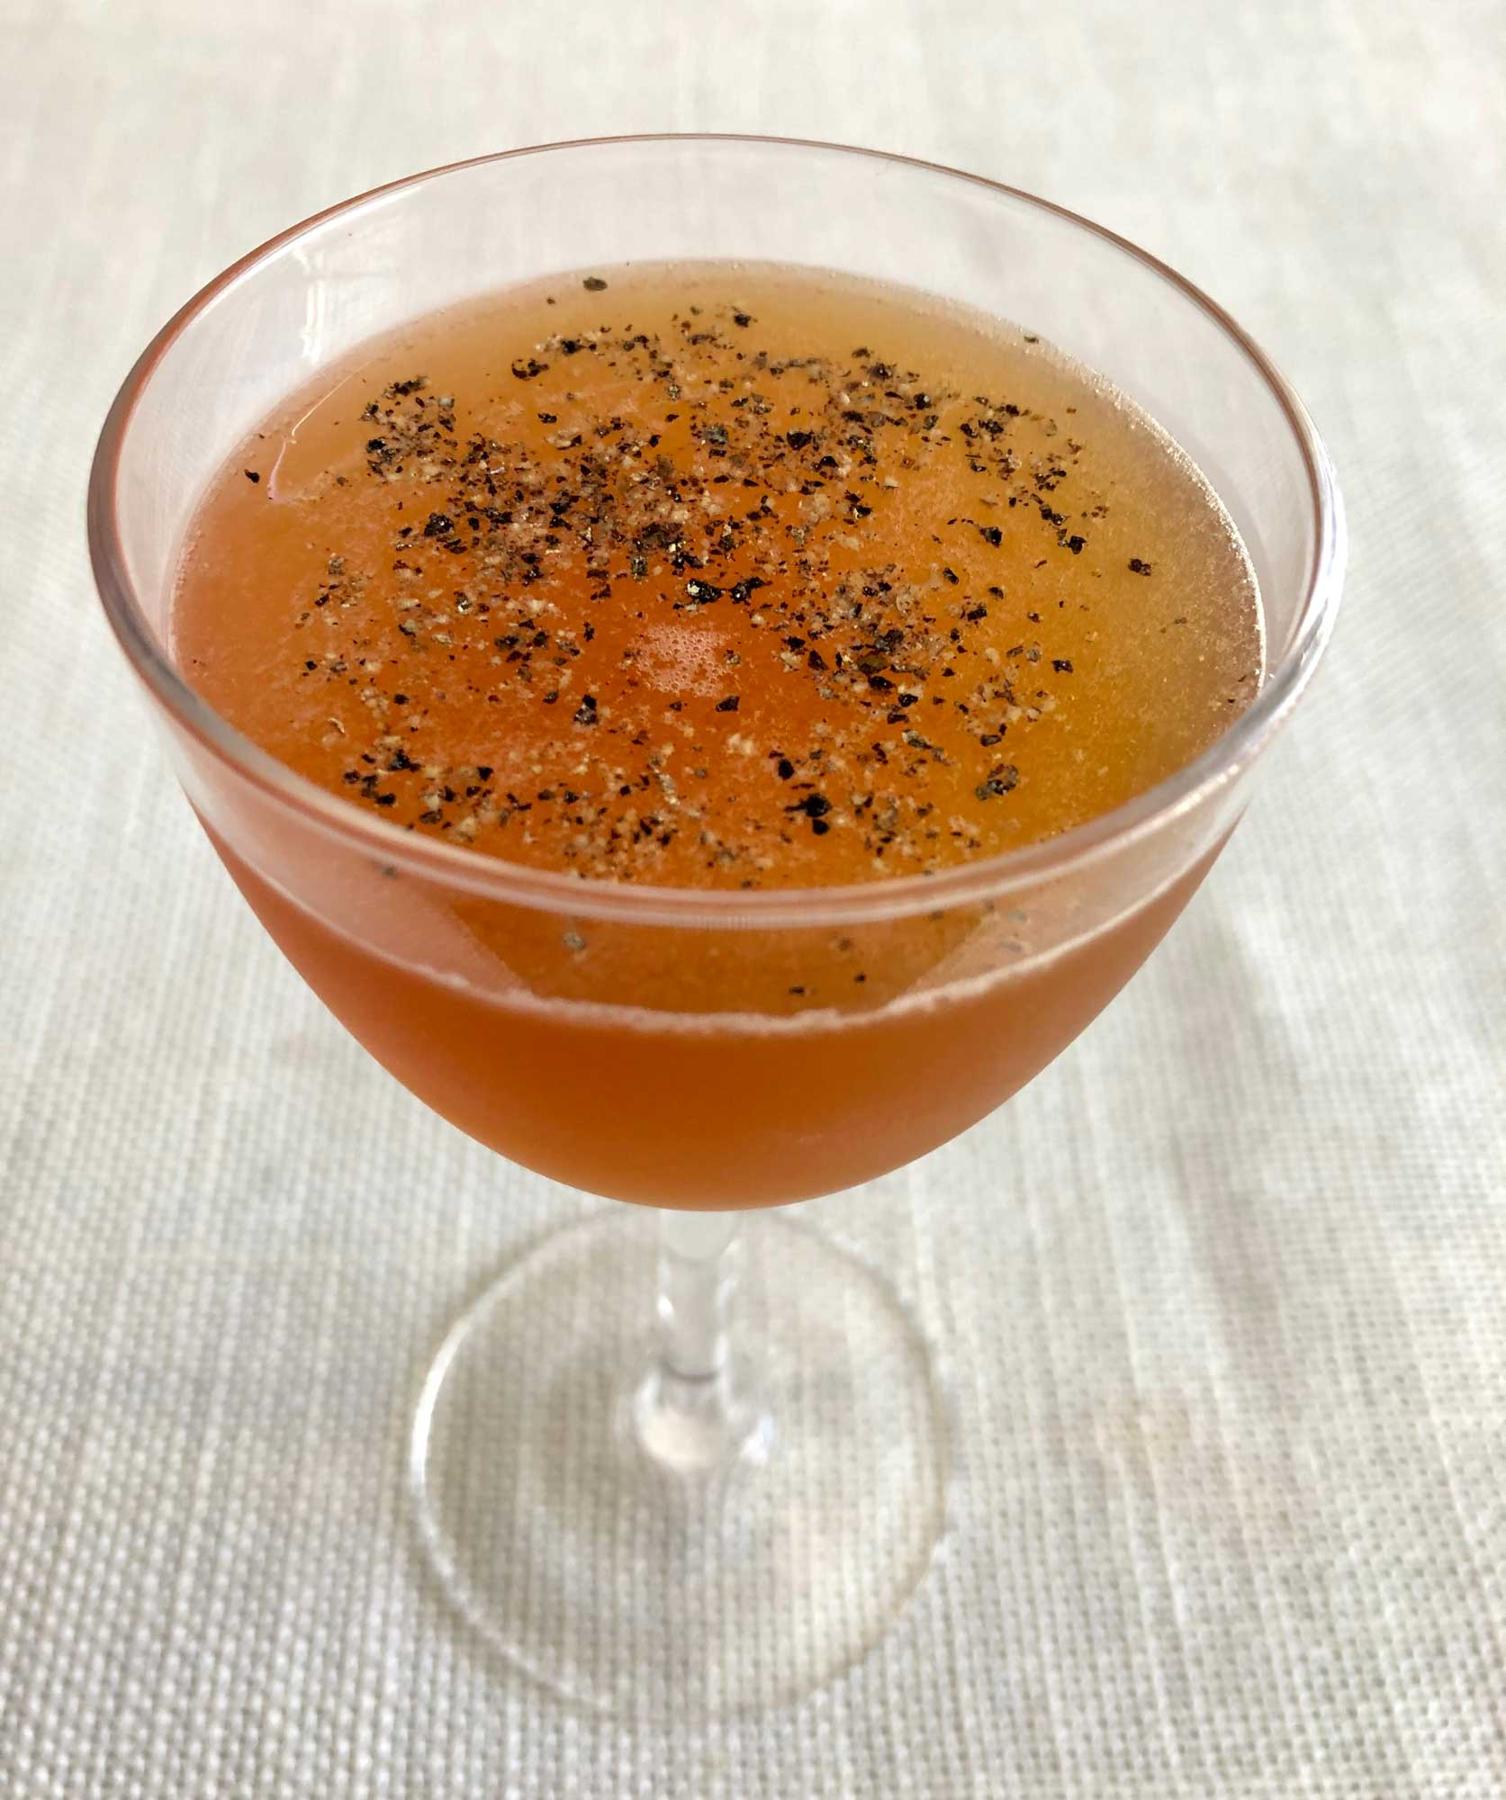 An example of the Tellicherry Cruiser, the mixed drink (drink), variation of the Philomel from the Savoy Cocktail Book, featuring Matifoc Rancio Sec, orange juice, Smith & Cross Traditional Jamaica Rum, Bonal Gentiane-Quina, Byrrh Grand Quinquina, and peppercorn; photo by Lee Edwards